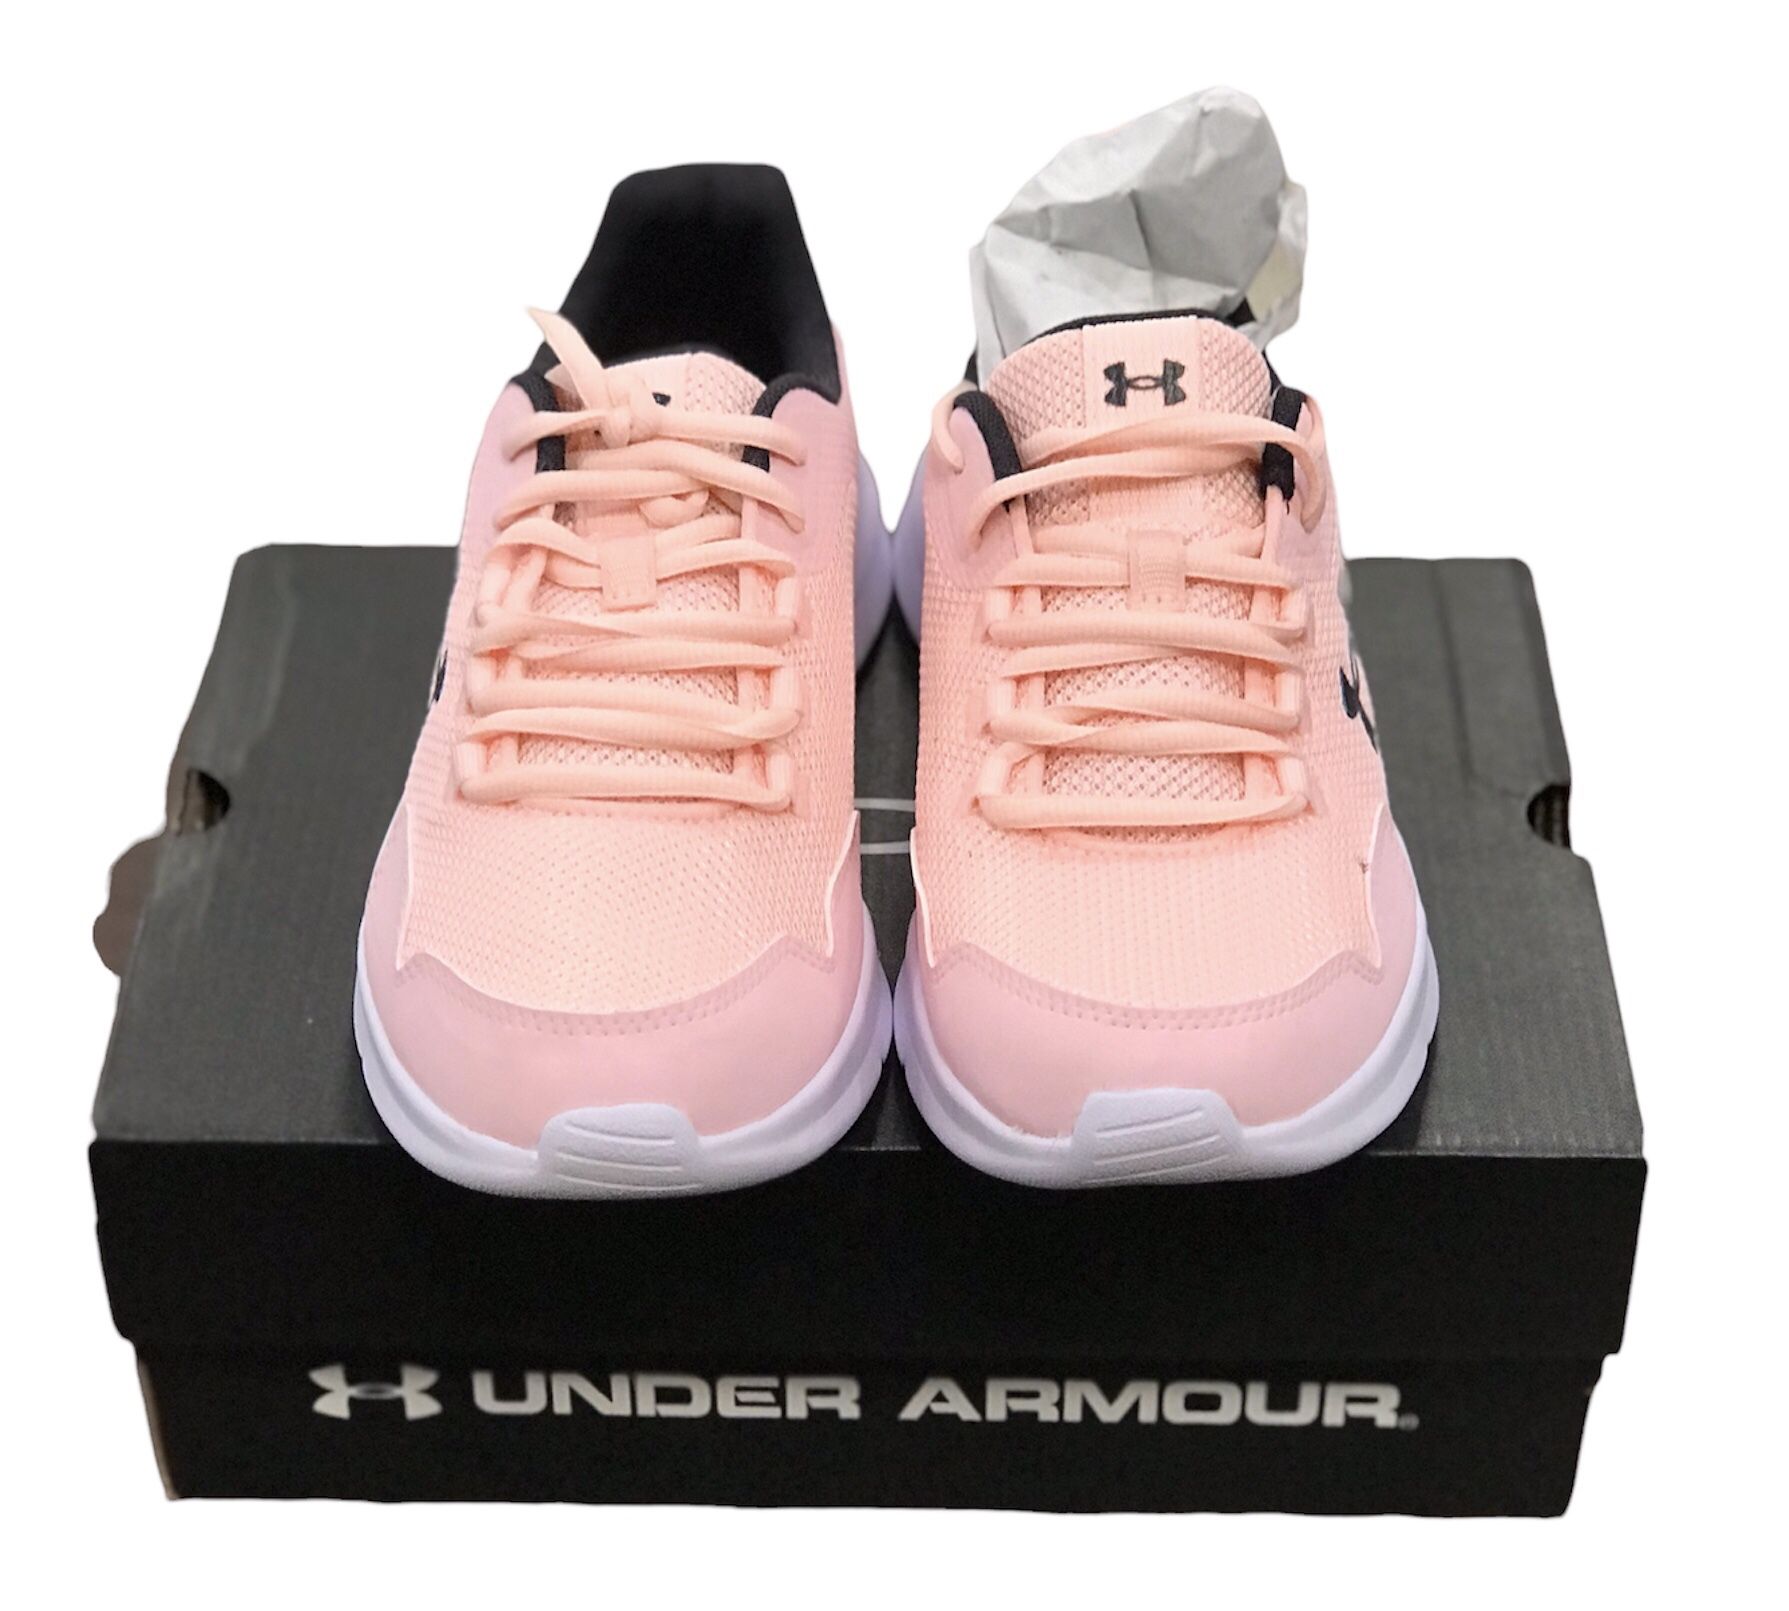 Under Armour Youth 6.5y Girls Sneaks New